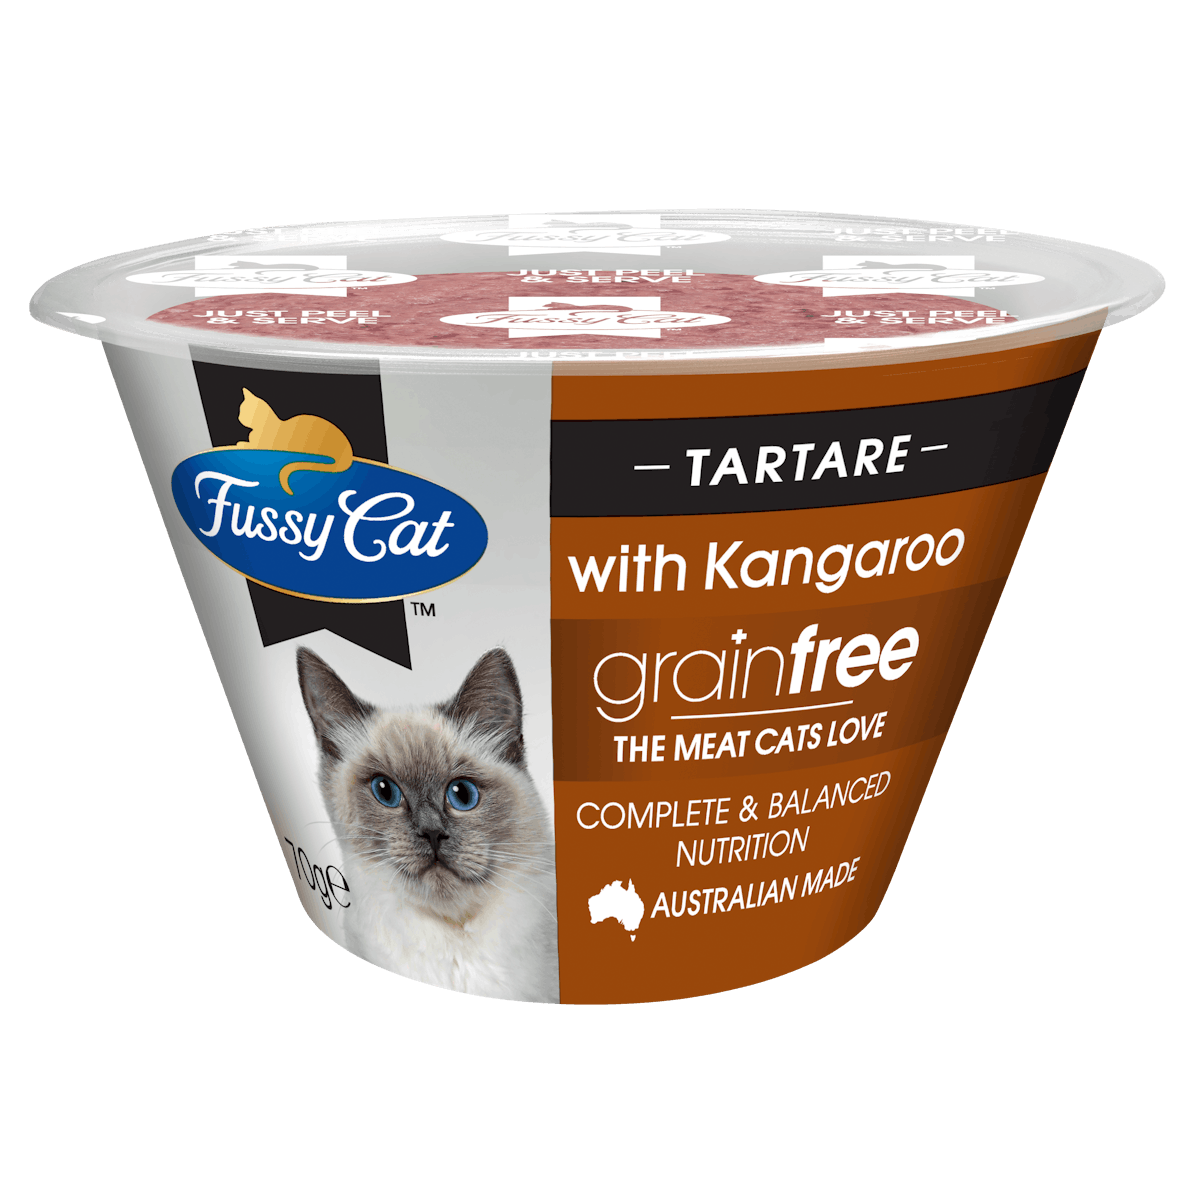 Fussy Cat | Tartare with Kangaroo 70g | Chilled cat food